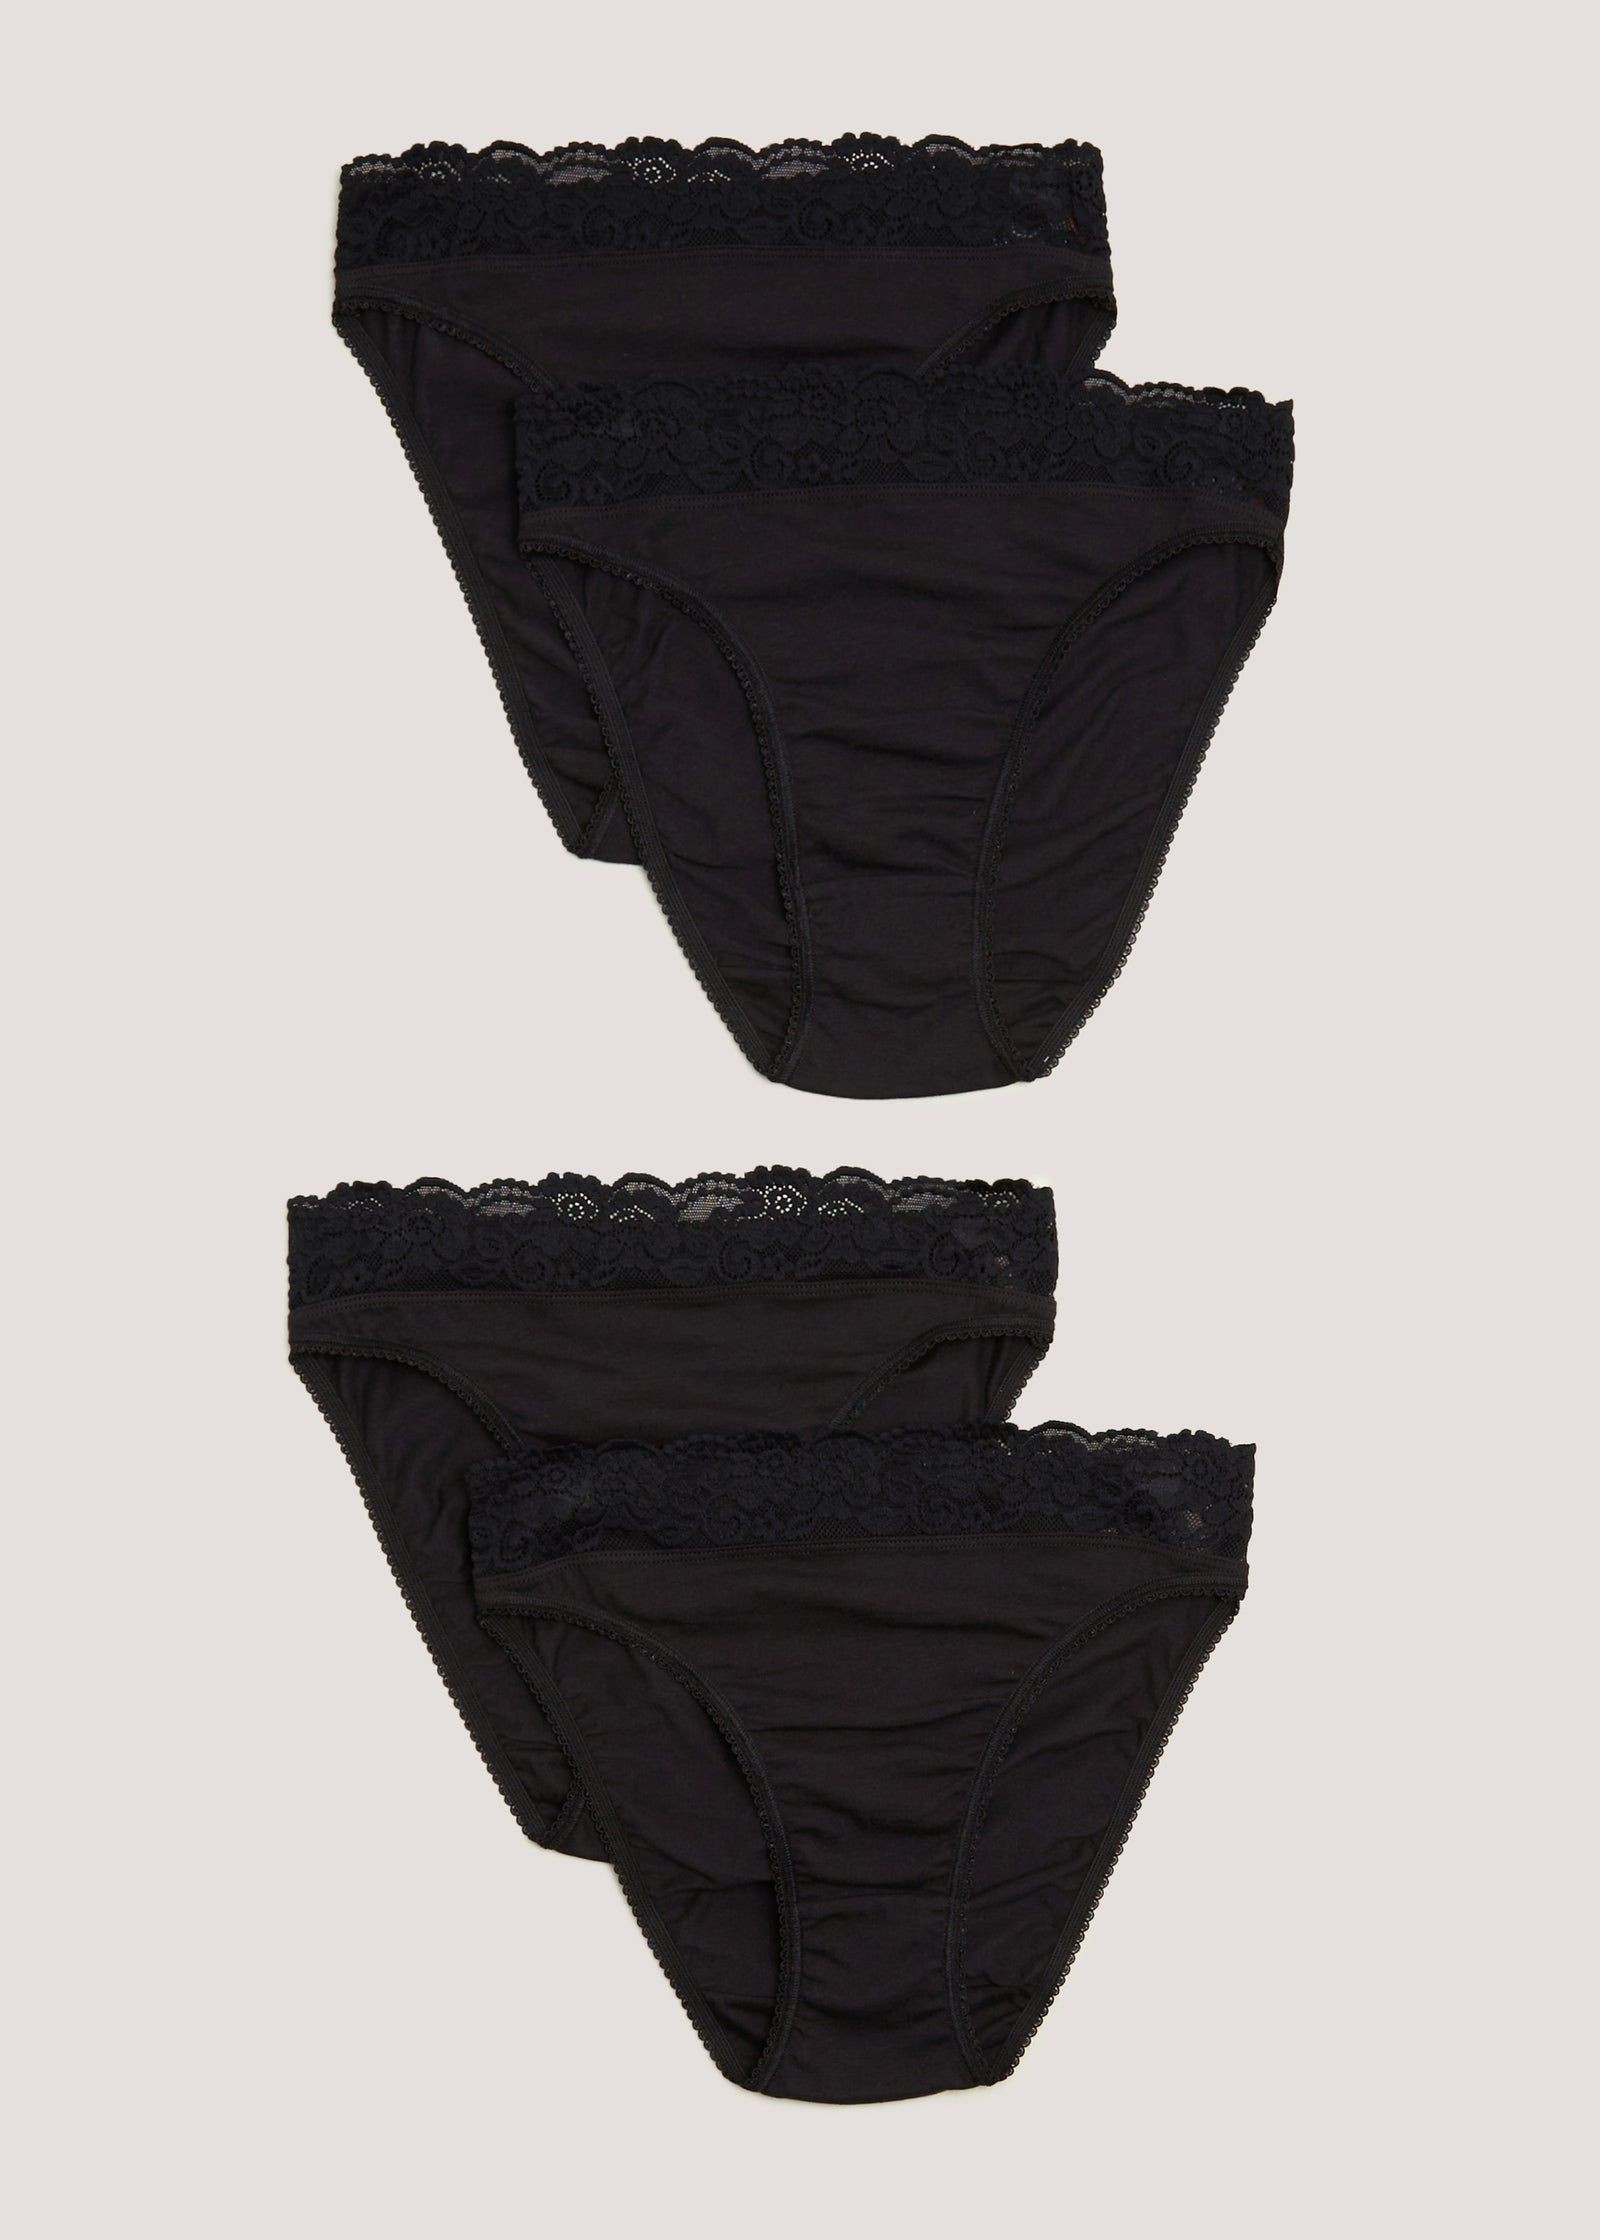 4 PACK Black Lace Trim High Waisted Full Briefs